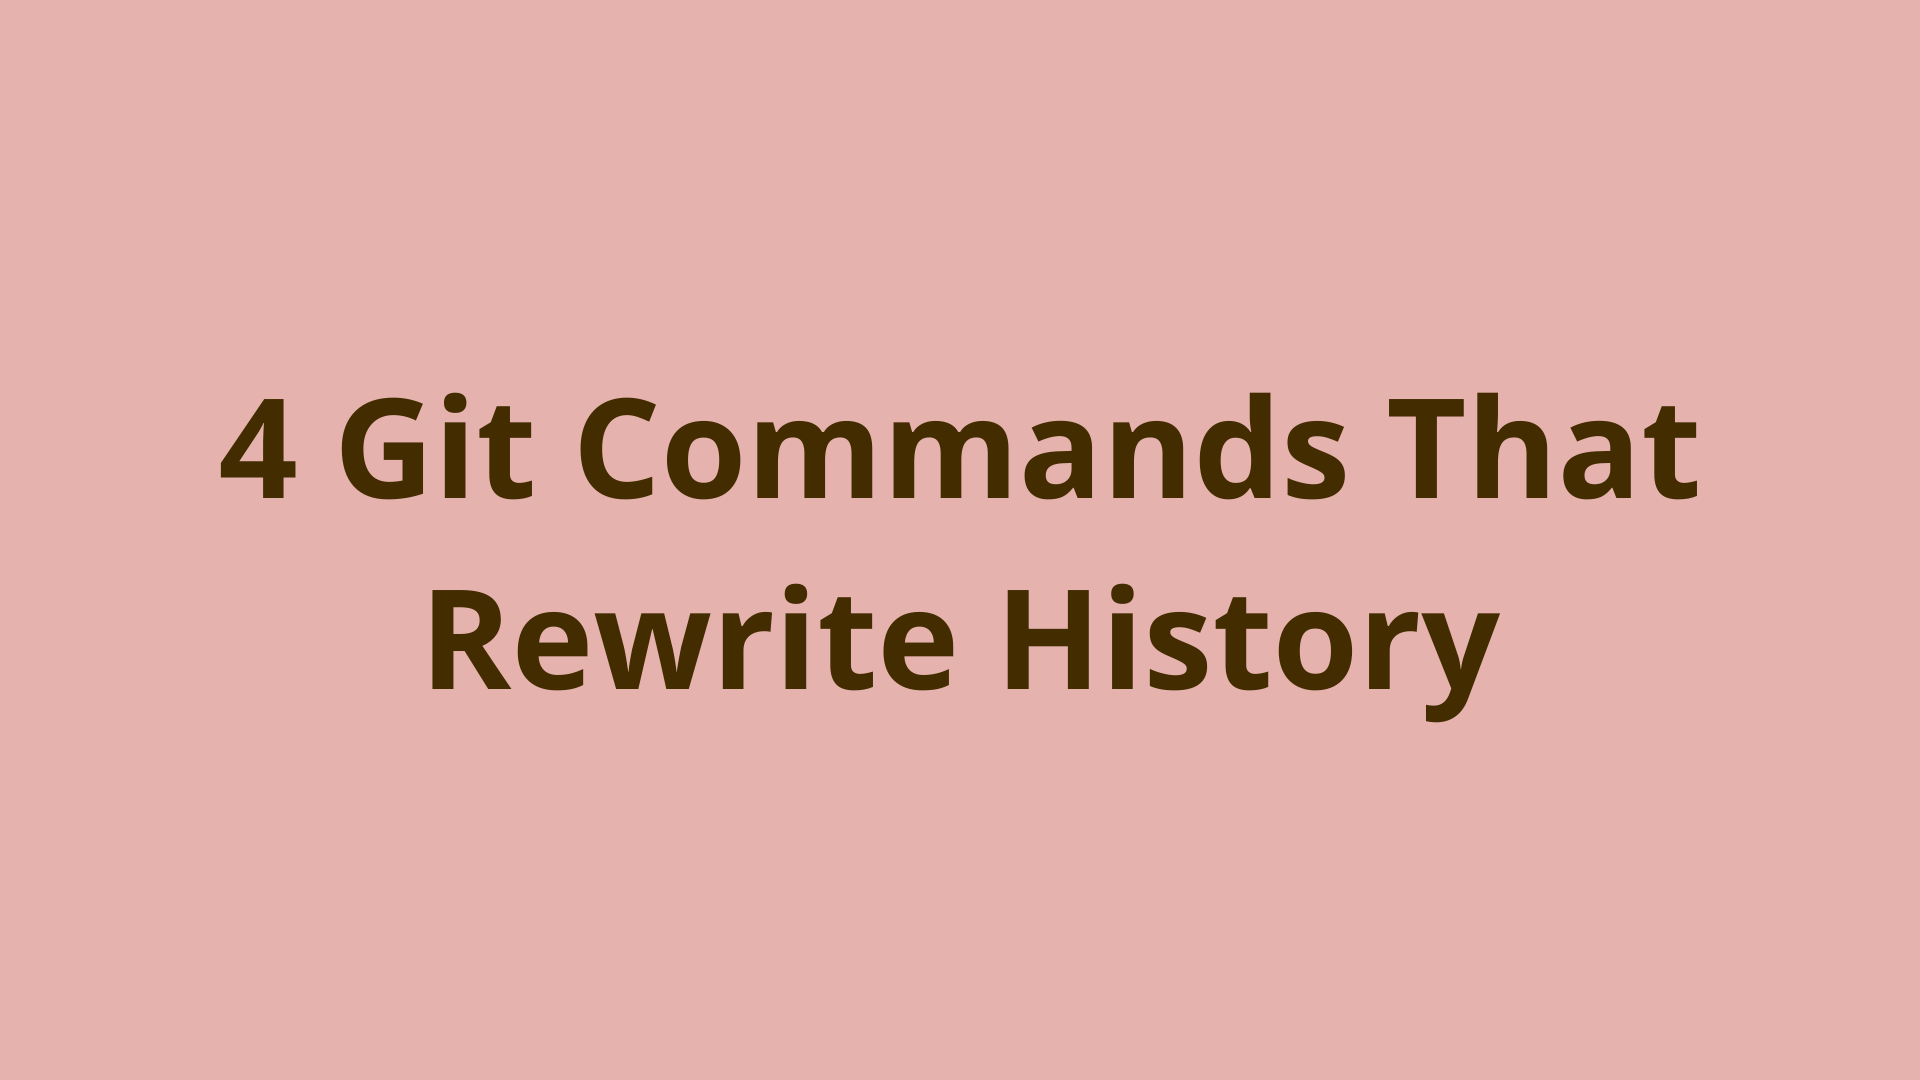 Image of 4 Git Commands that Rewrite Commit History